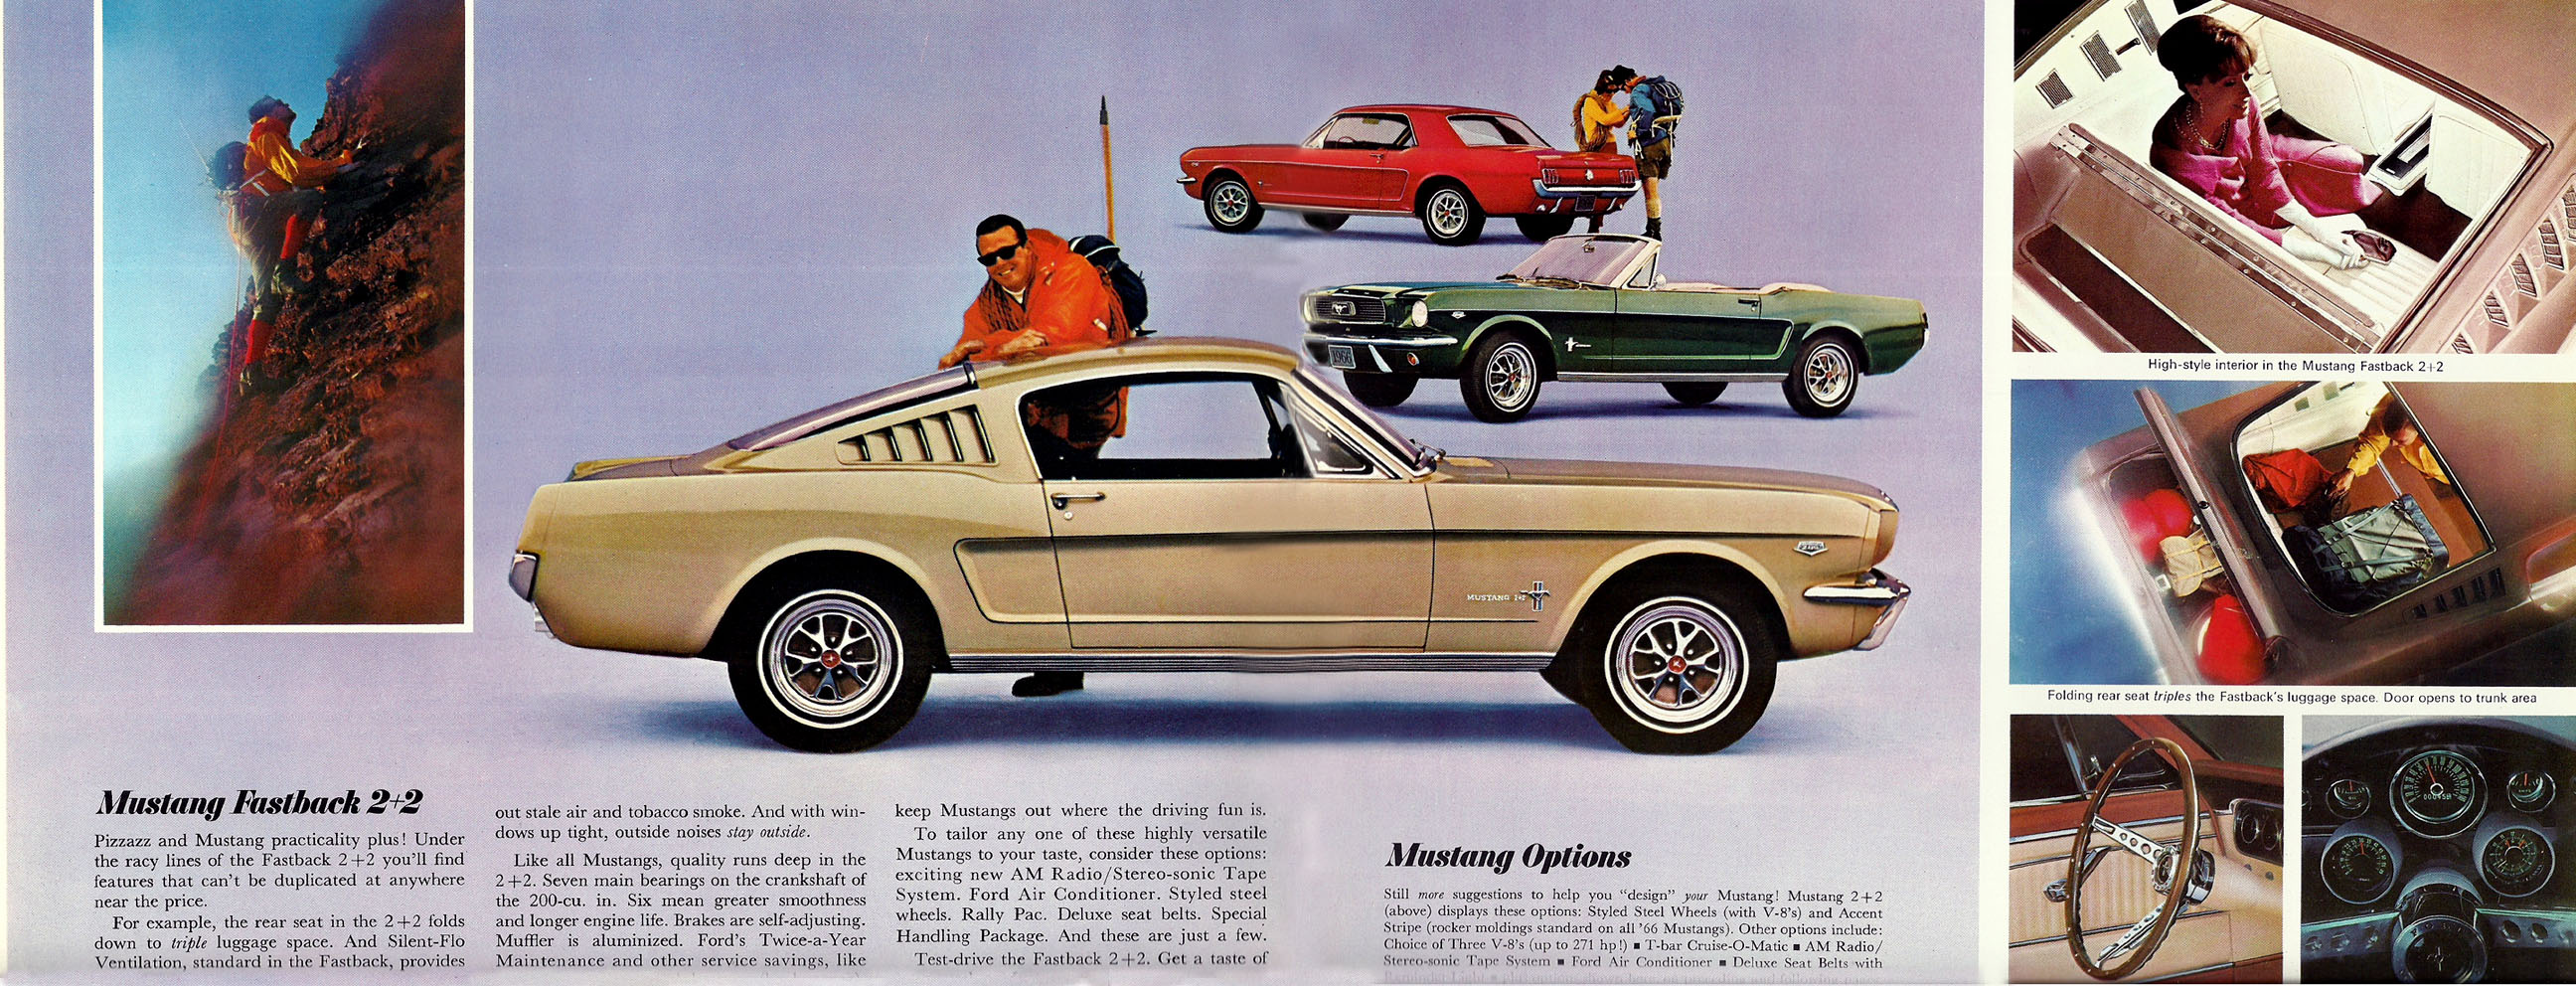 1966 Ford Mustang Brochure Page 6